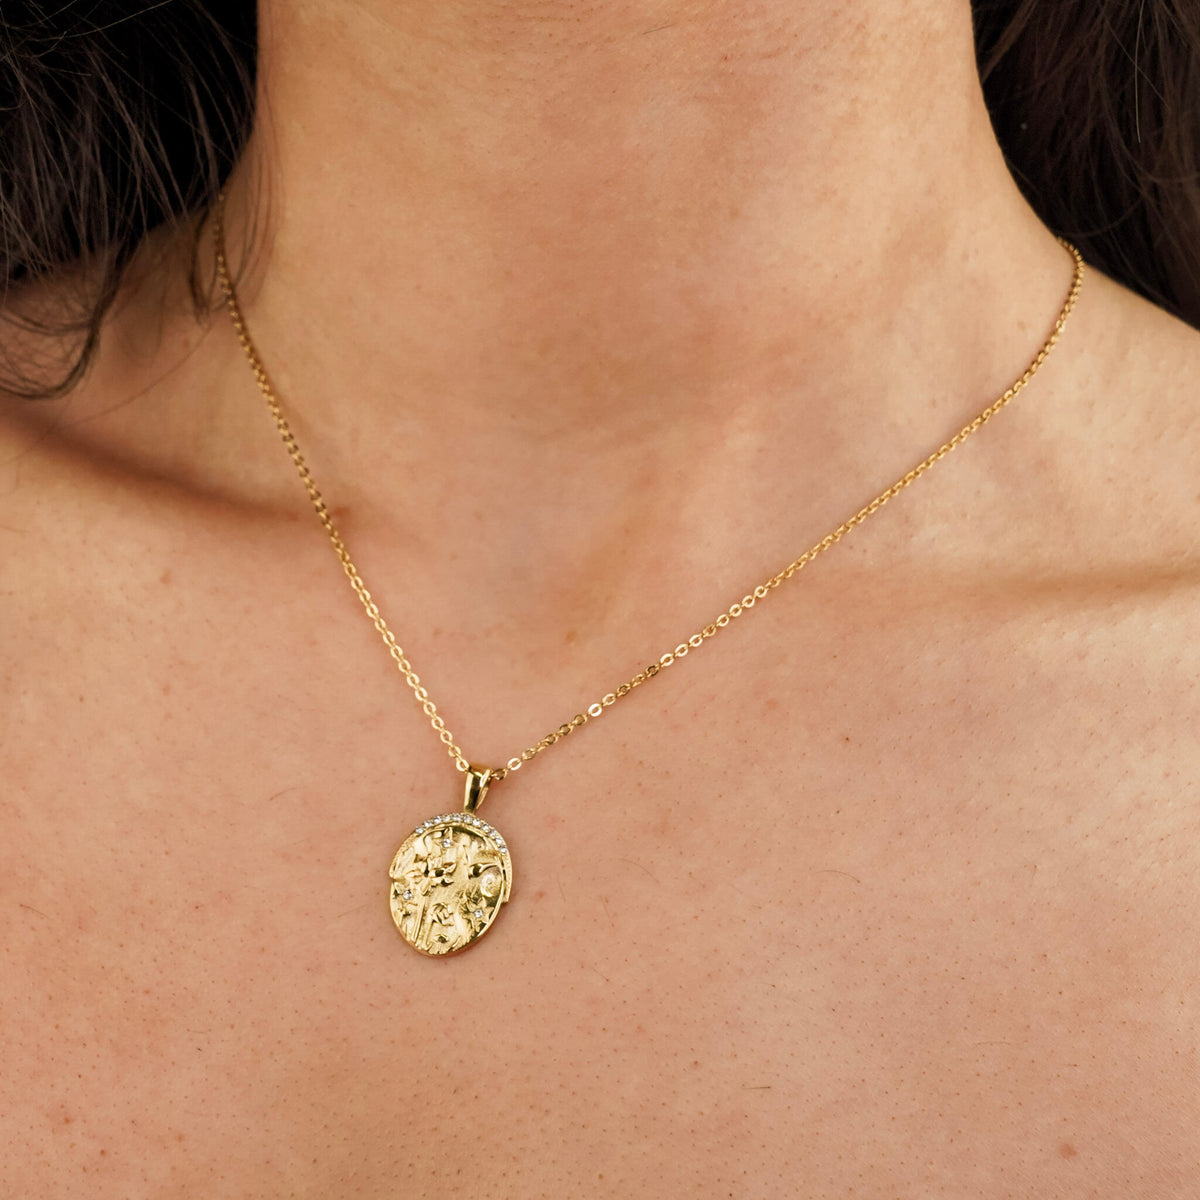 necklace called days eye because it symbolises the daisies opening their petals in the morning to welcome a new day